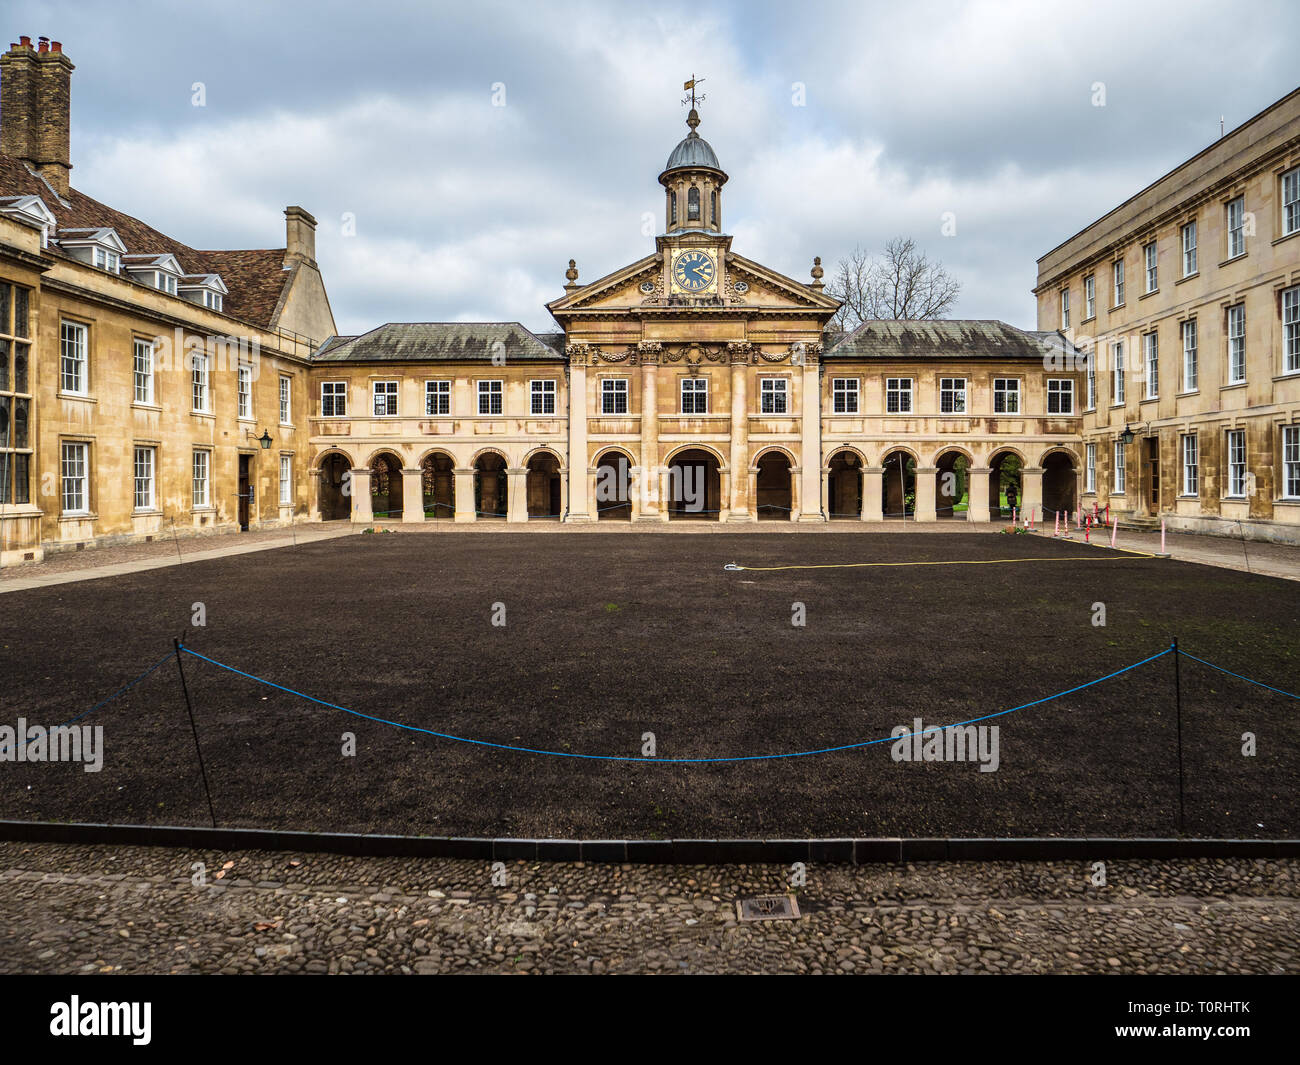 Lawncare - replanting the lawn - preparing for a refreshed lawn in the courtyard of Emmanuel College in Cambridge Stock Photo